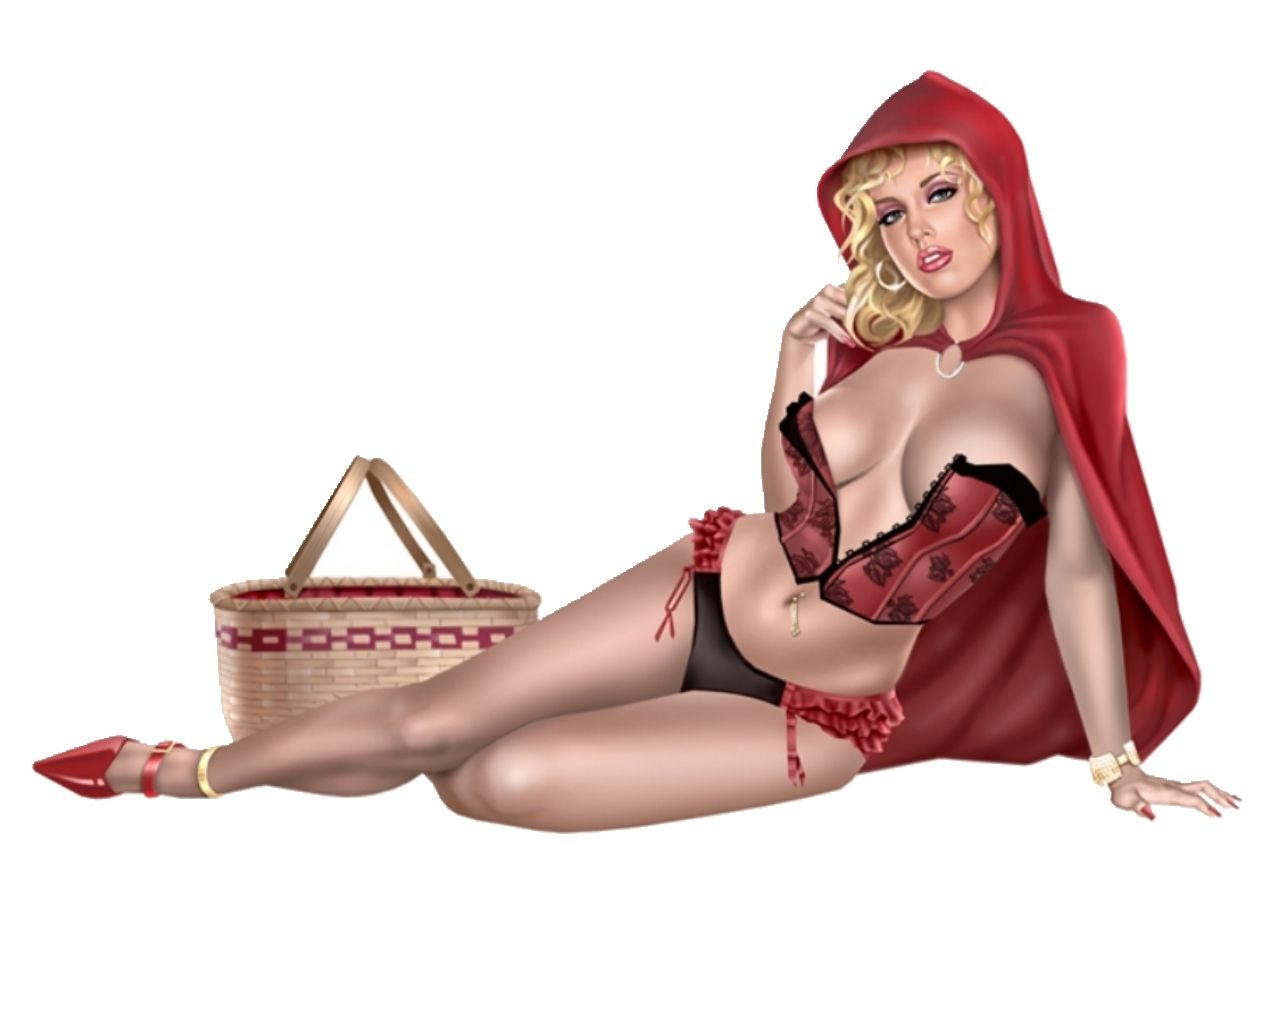 keith garvey little red riding hood